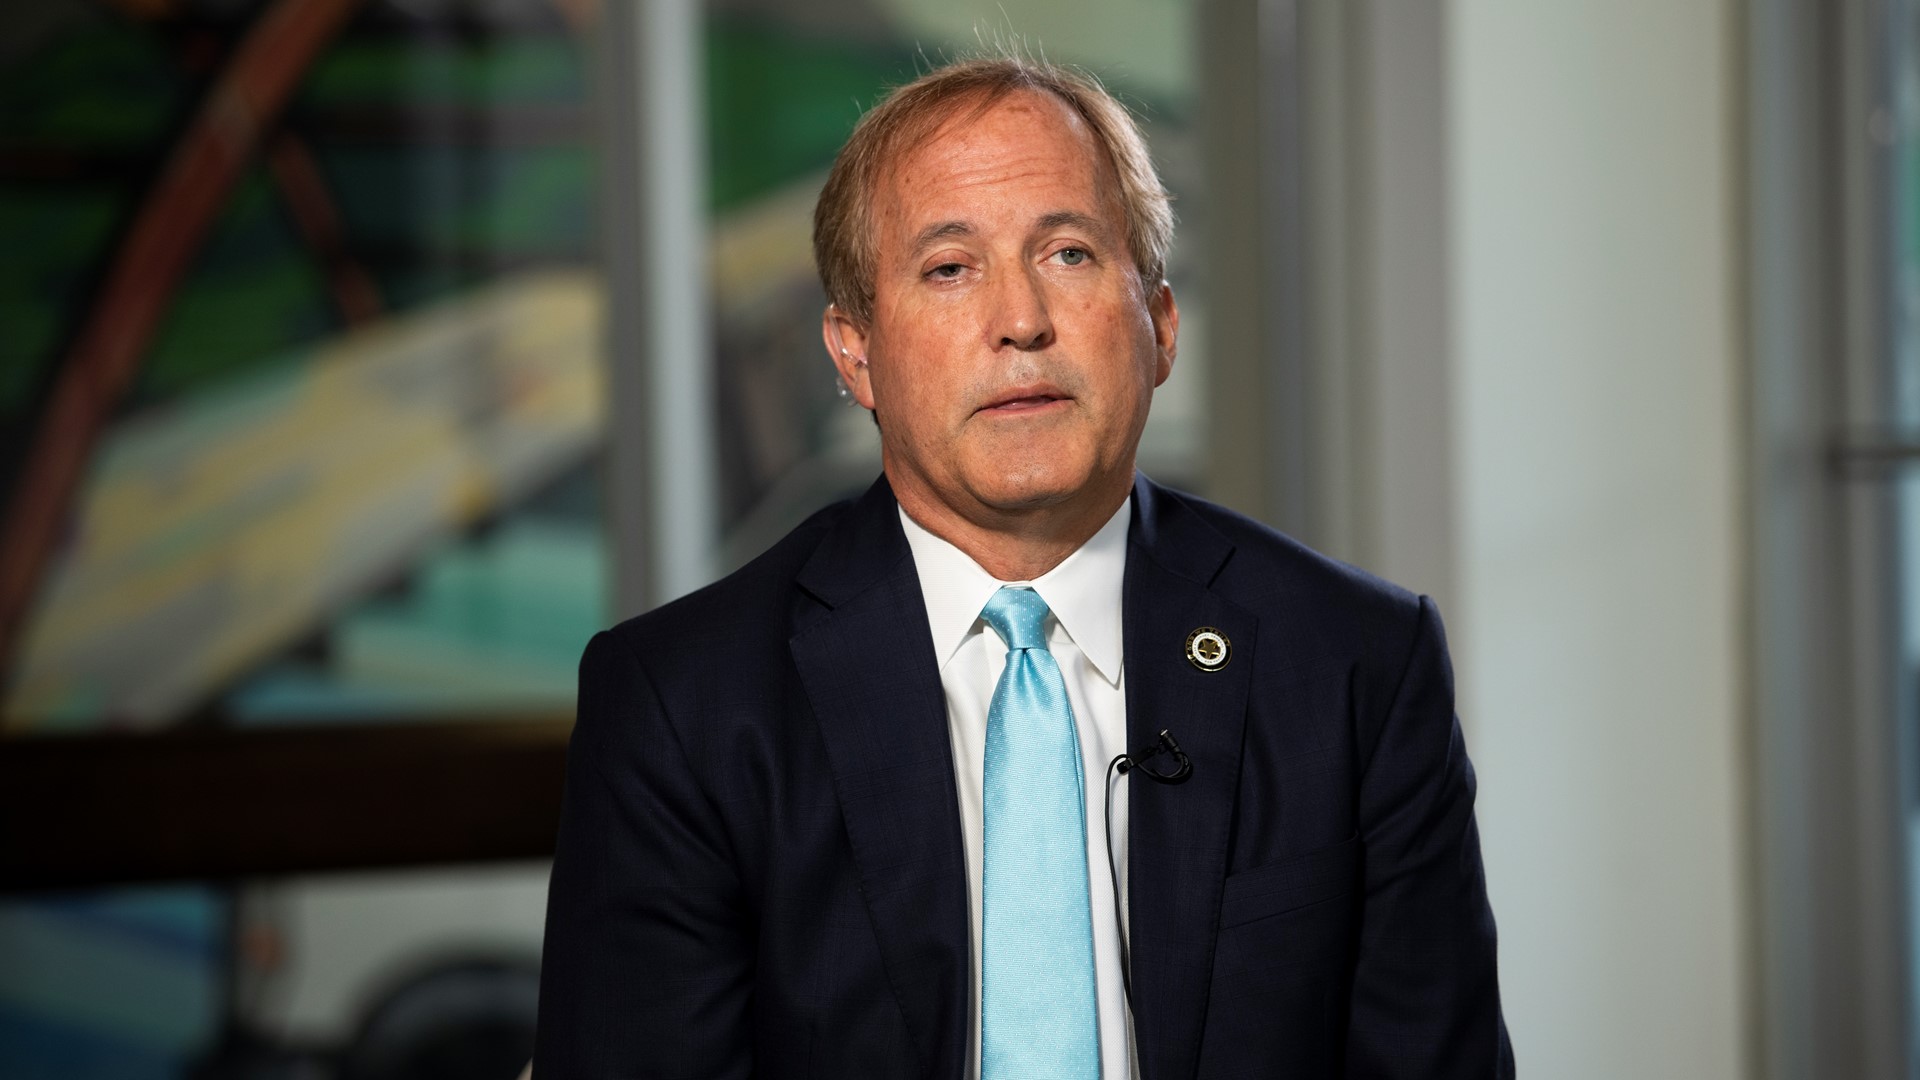 Charges against Texas Attorney General Ken Paxton were dropped this week in a pre-trial agreement.